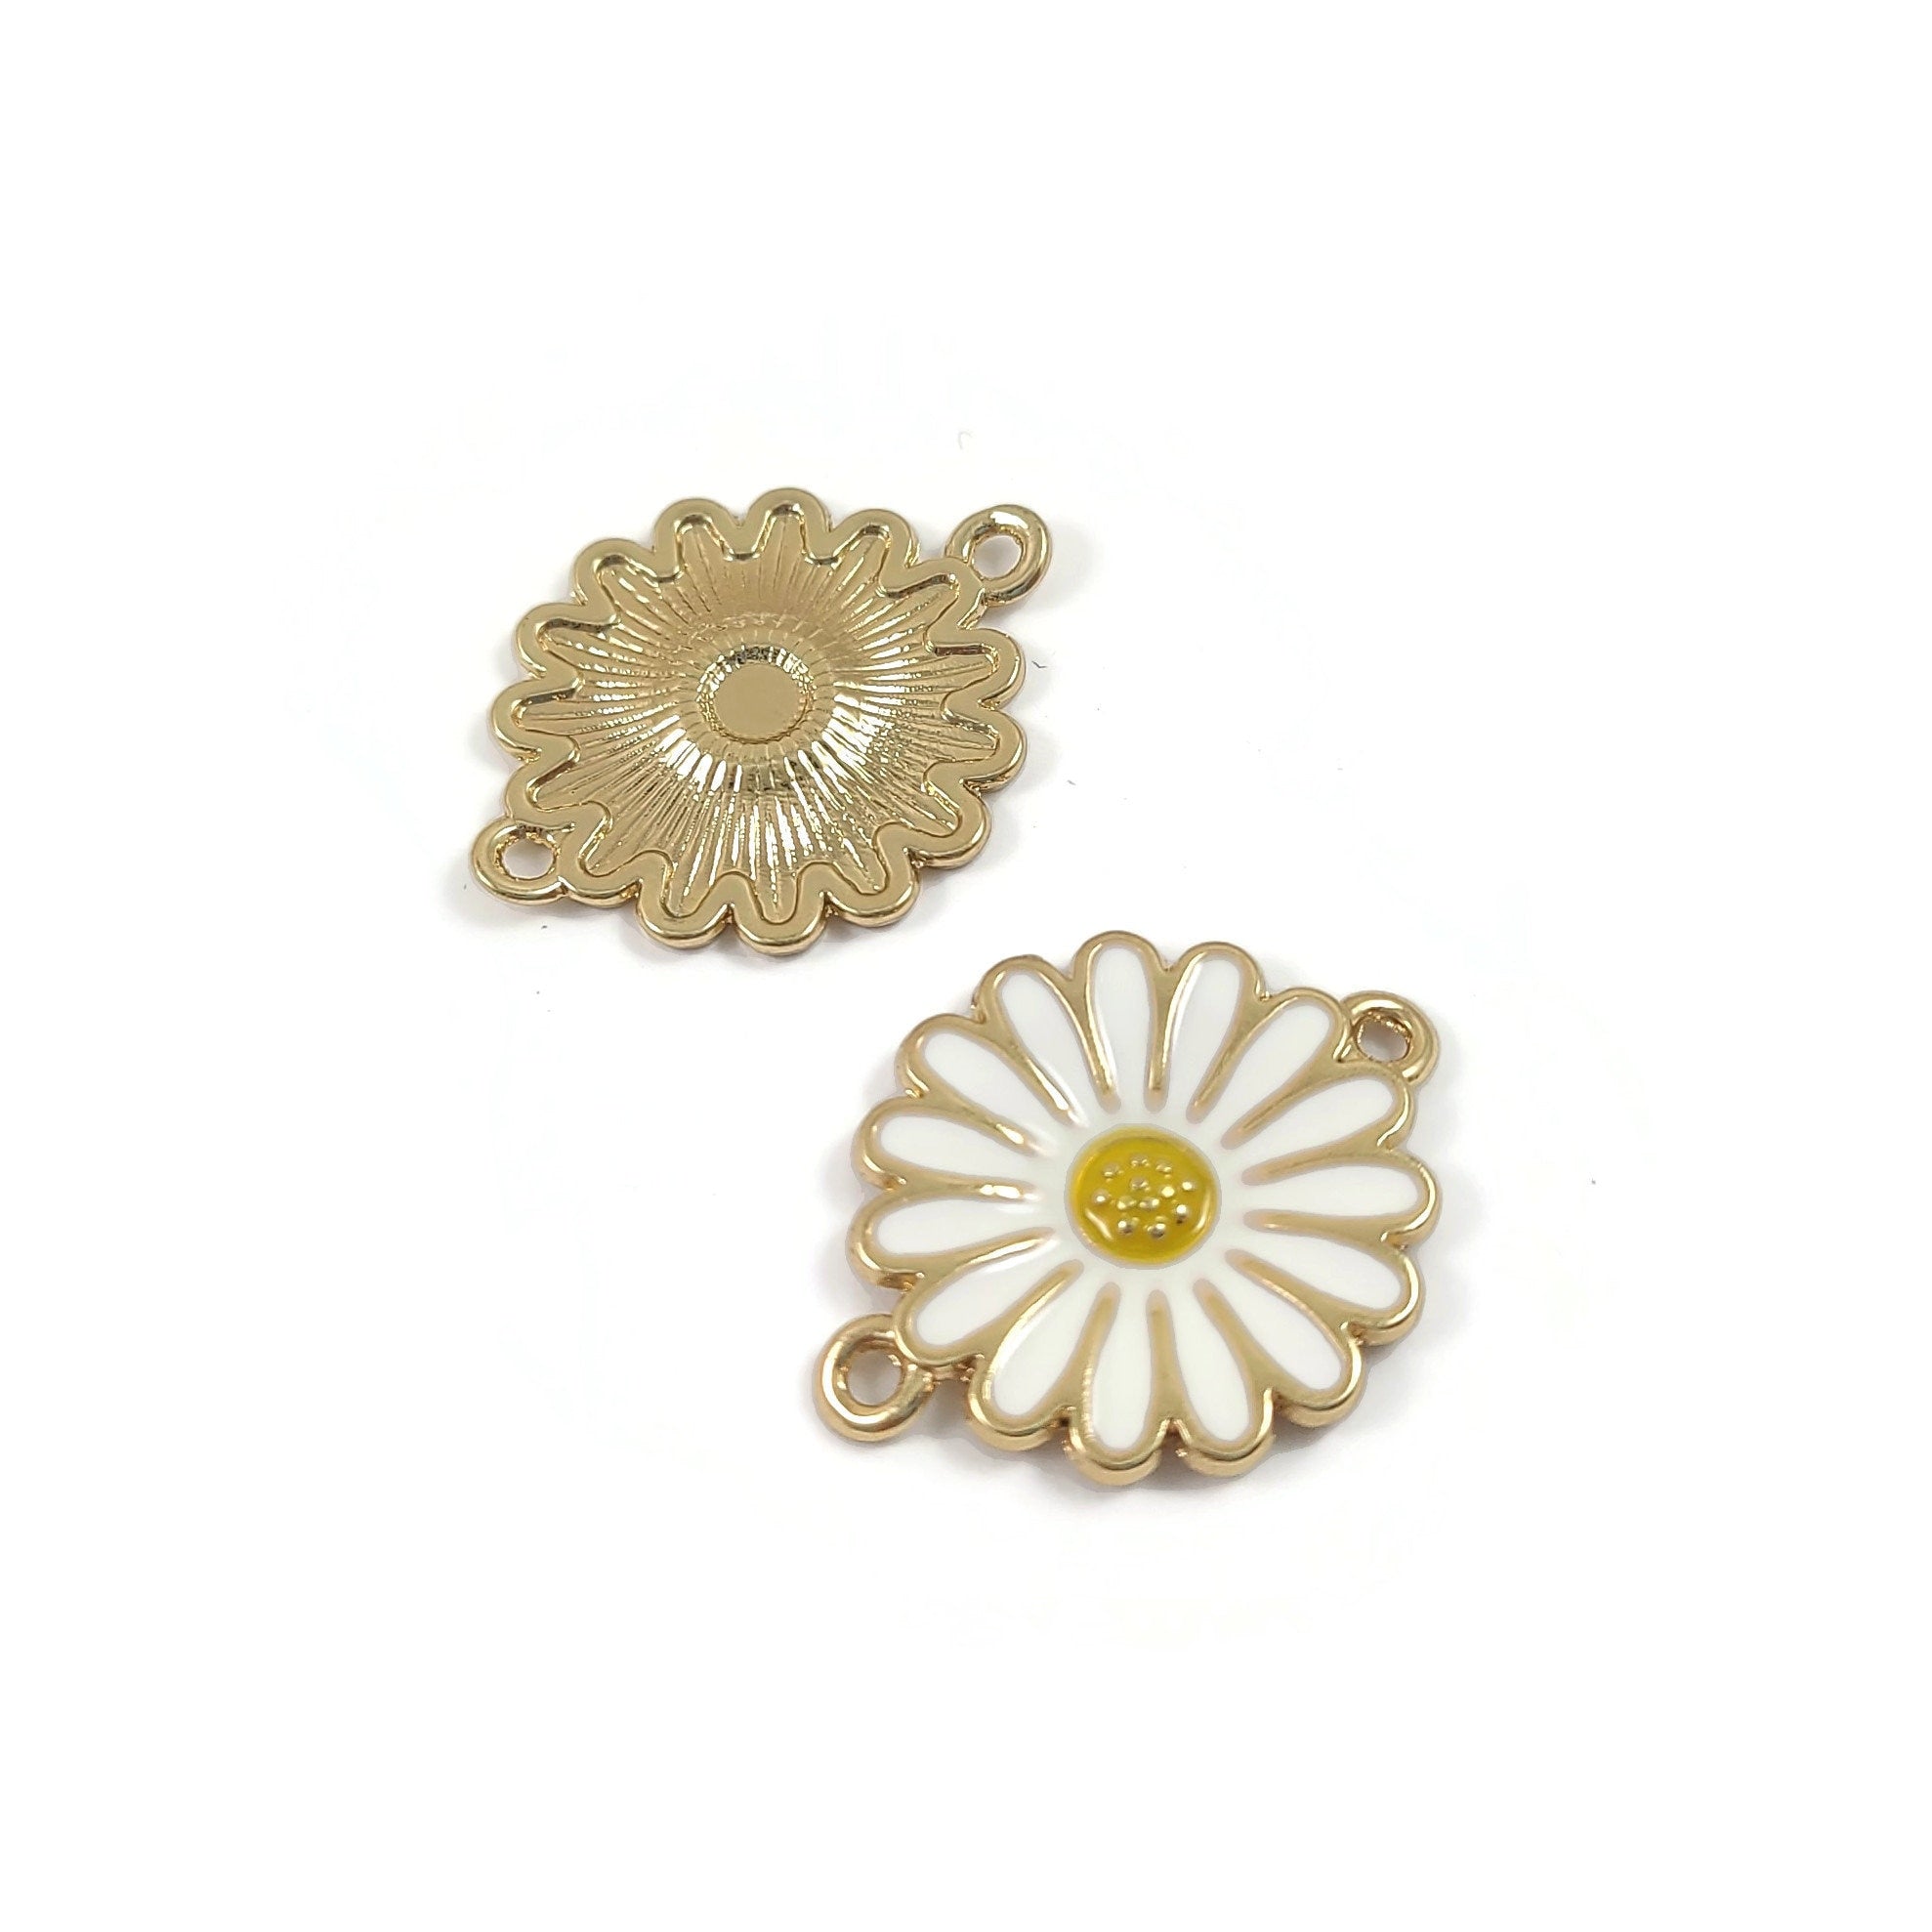 White and gold daisy connectors, Hypoallergenic nickel free charm for jewelry making